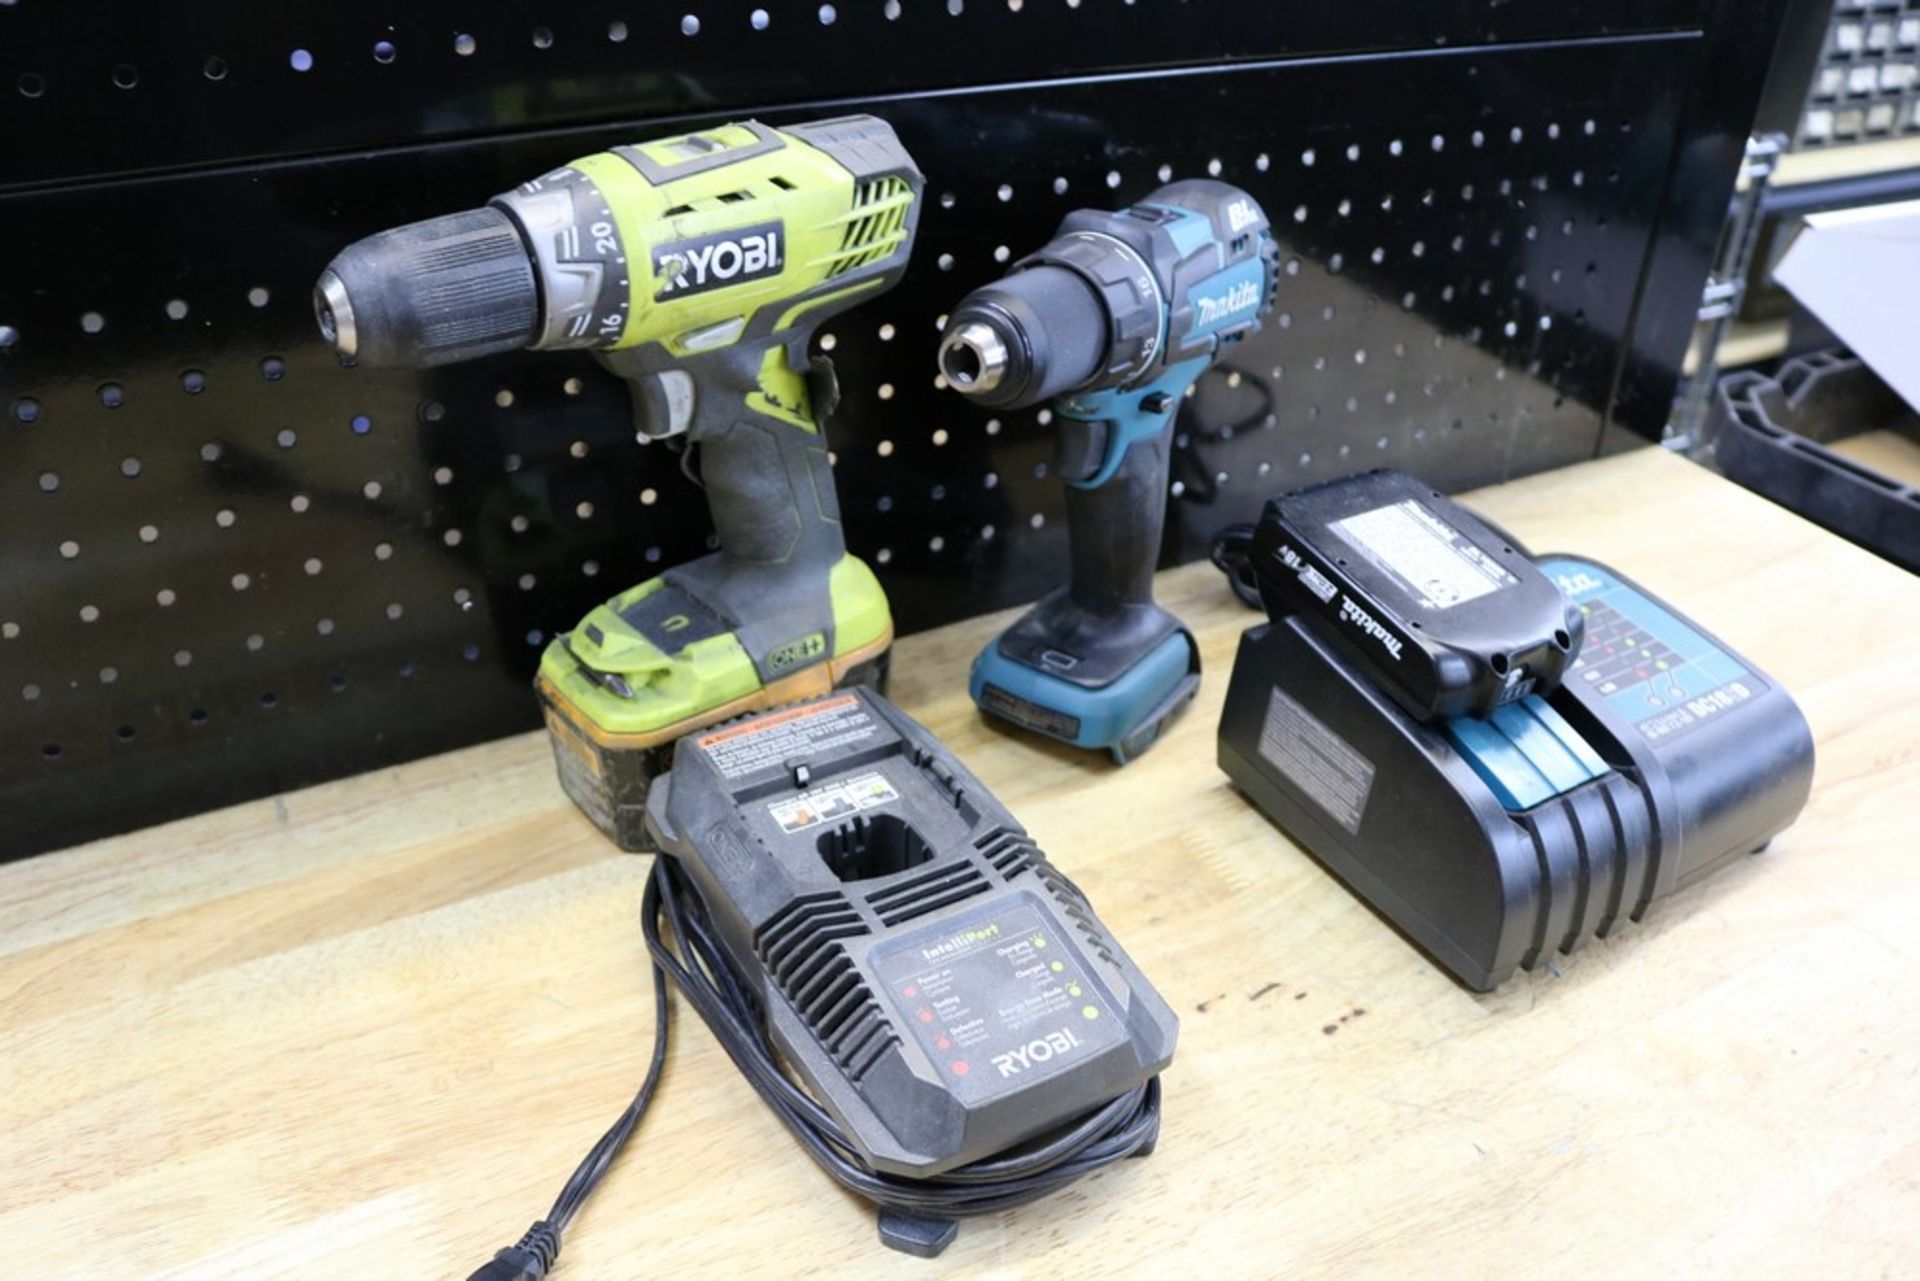 Makita XFD06 Cordelss Drill 18V with Battery and Charger, Ryobi 18v Cordless Drill with Battery - Image 3 of 3